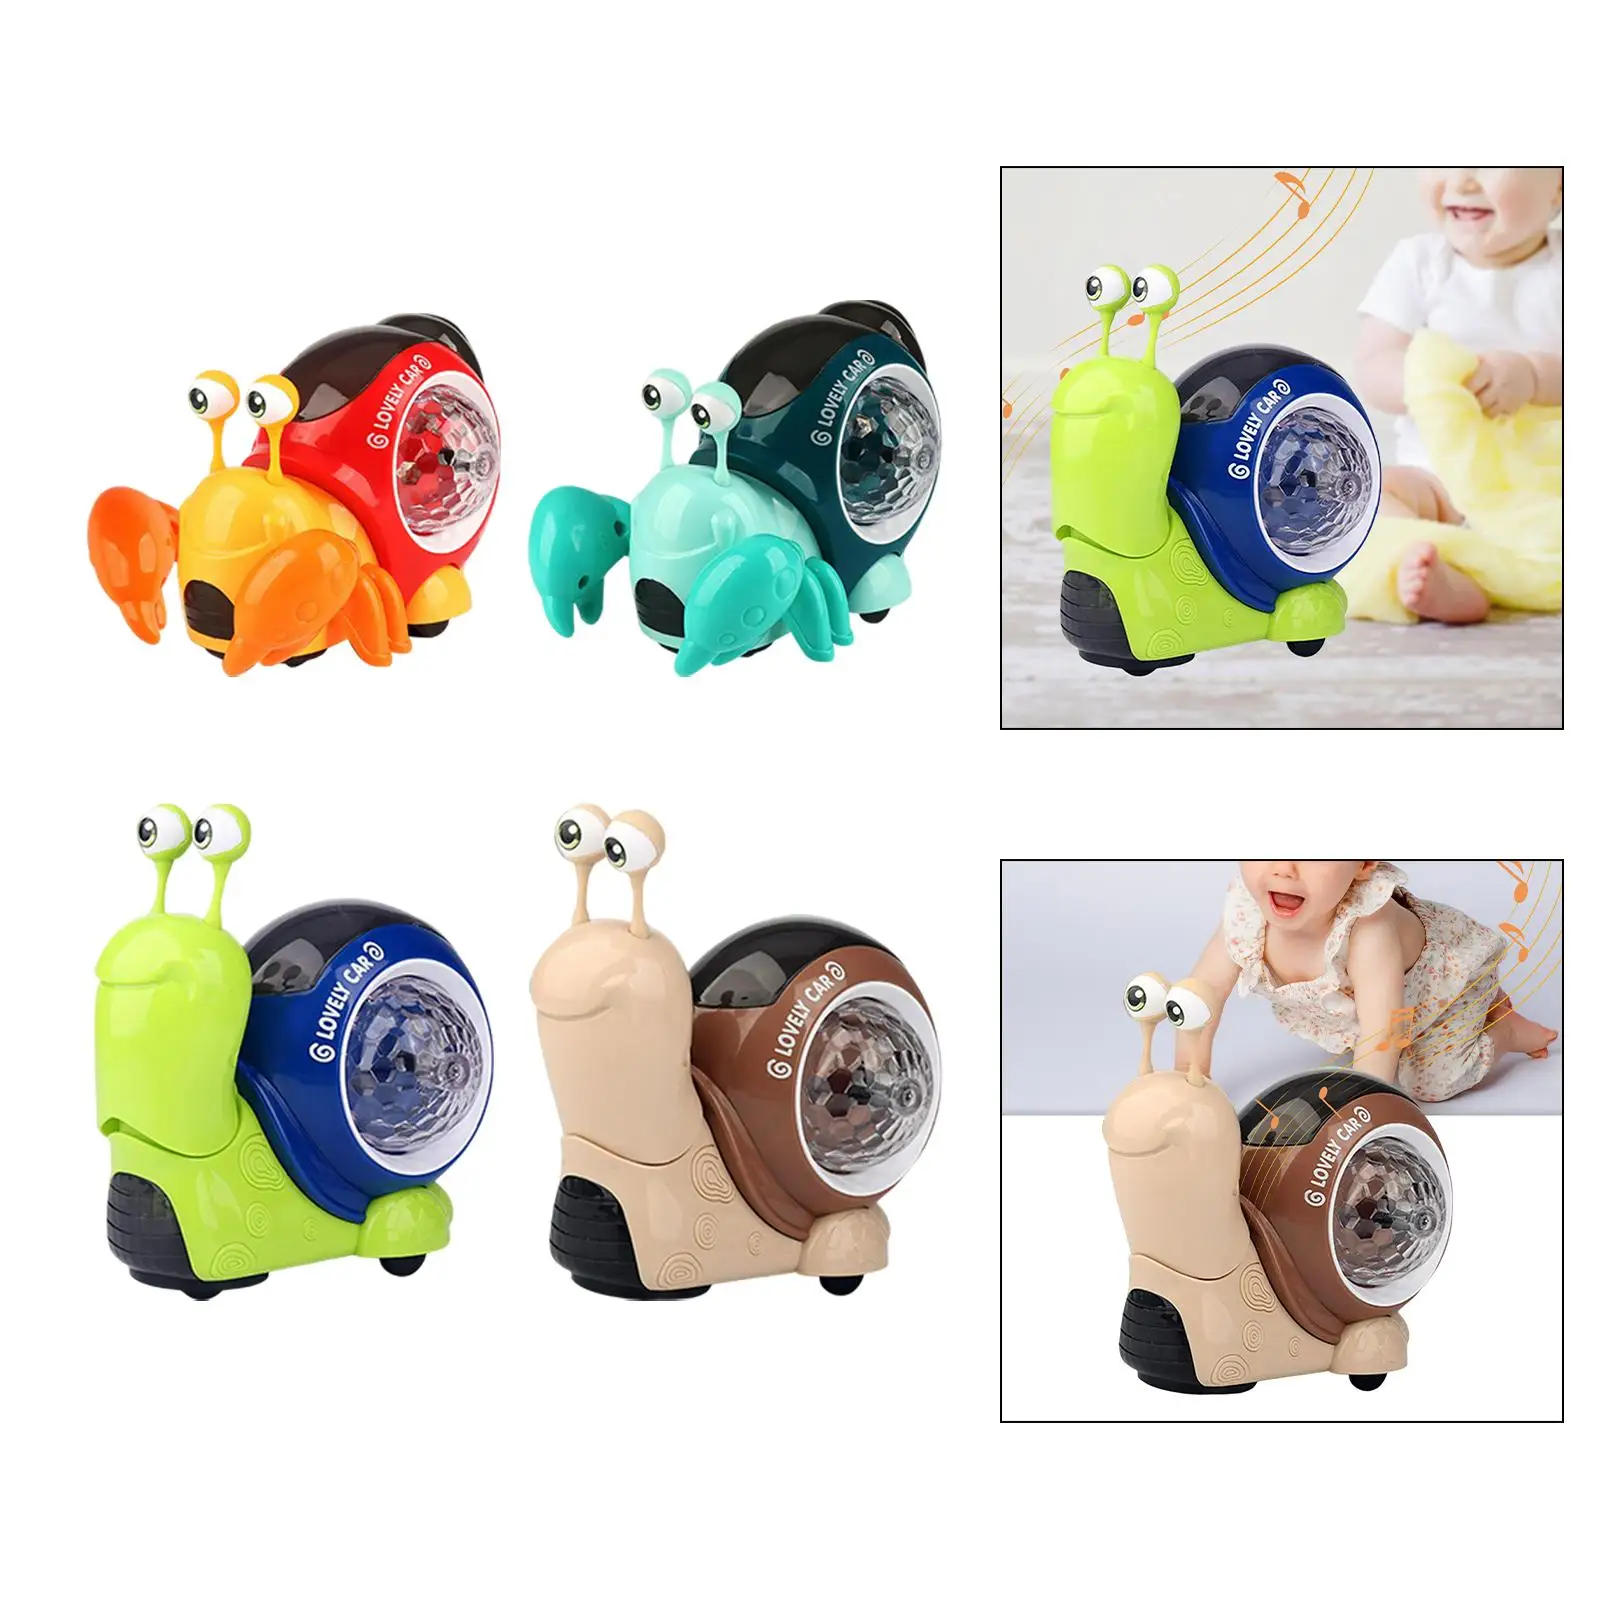 Car cute toy Musical Developmental for Birthday Present Gift 6+ Years Old Kids